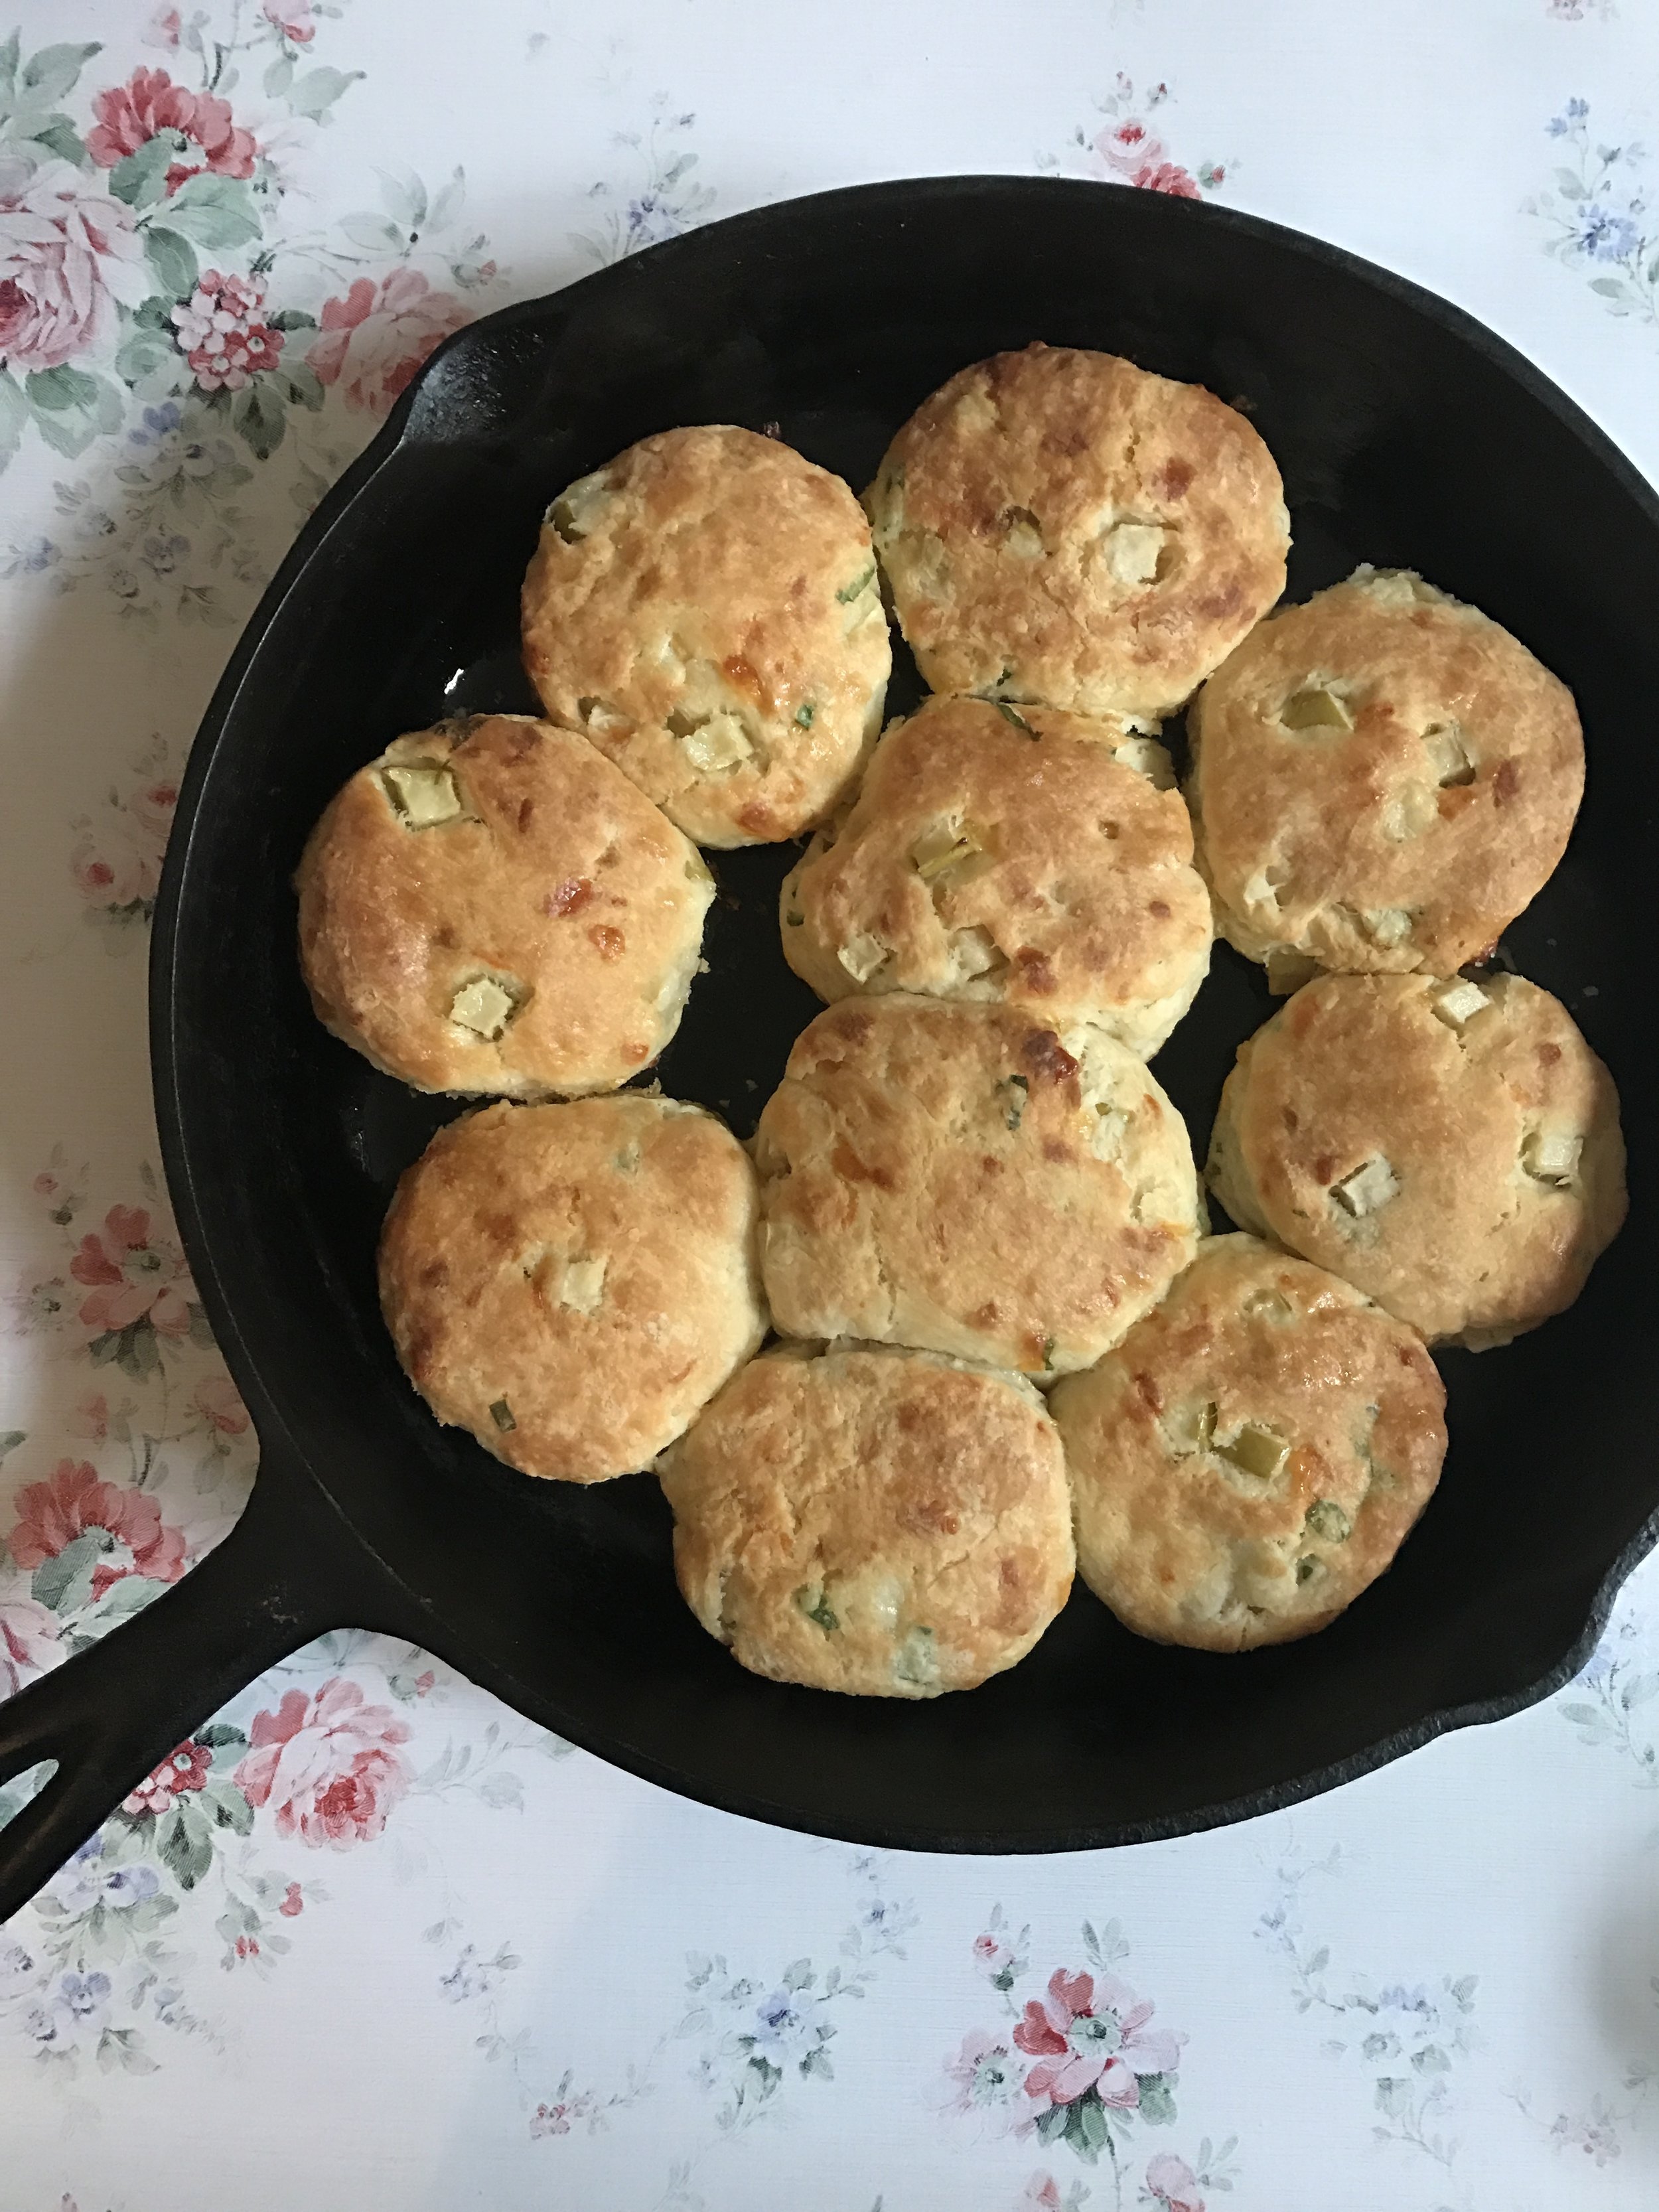 Green Apple, Smoked Cheddar and Chives Biscuits 1.jpg